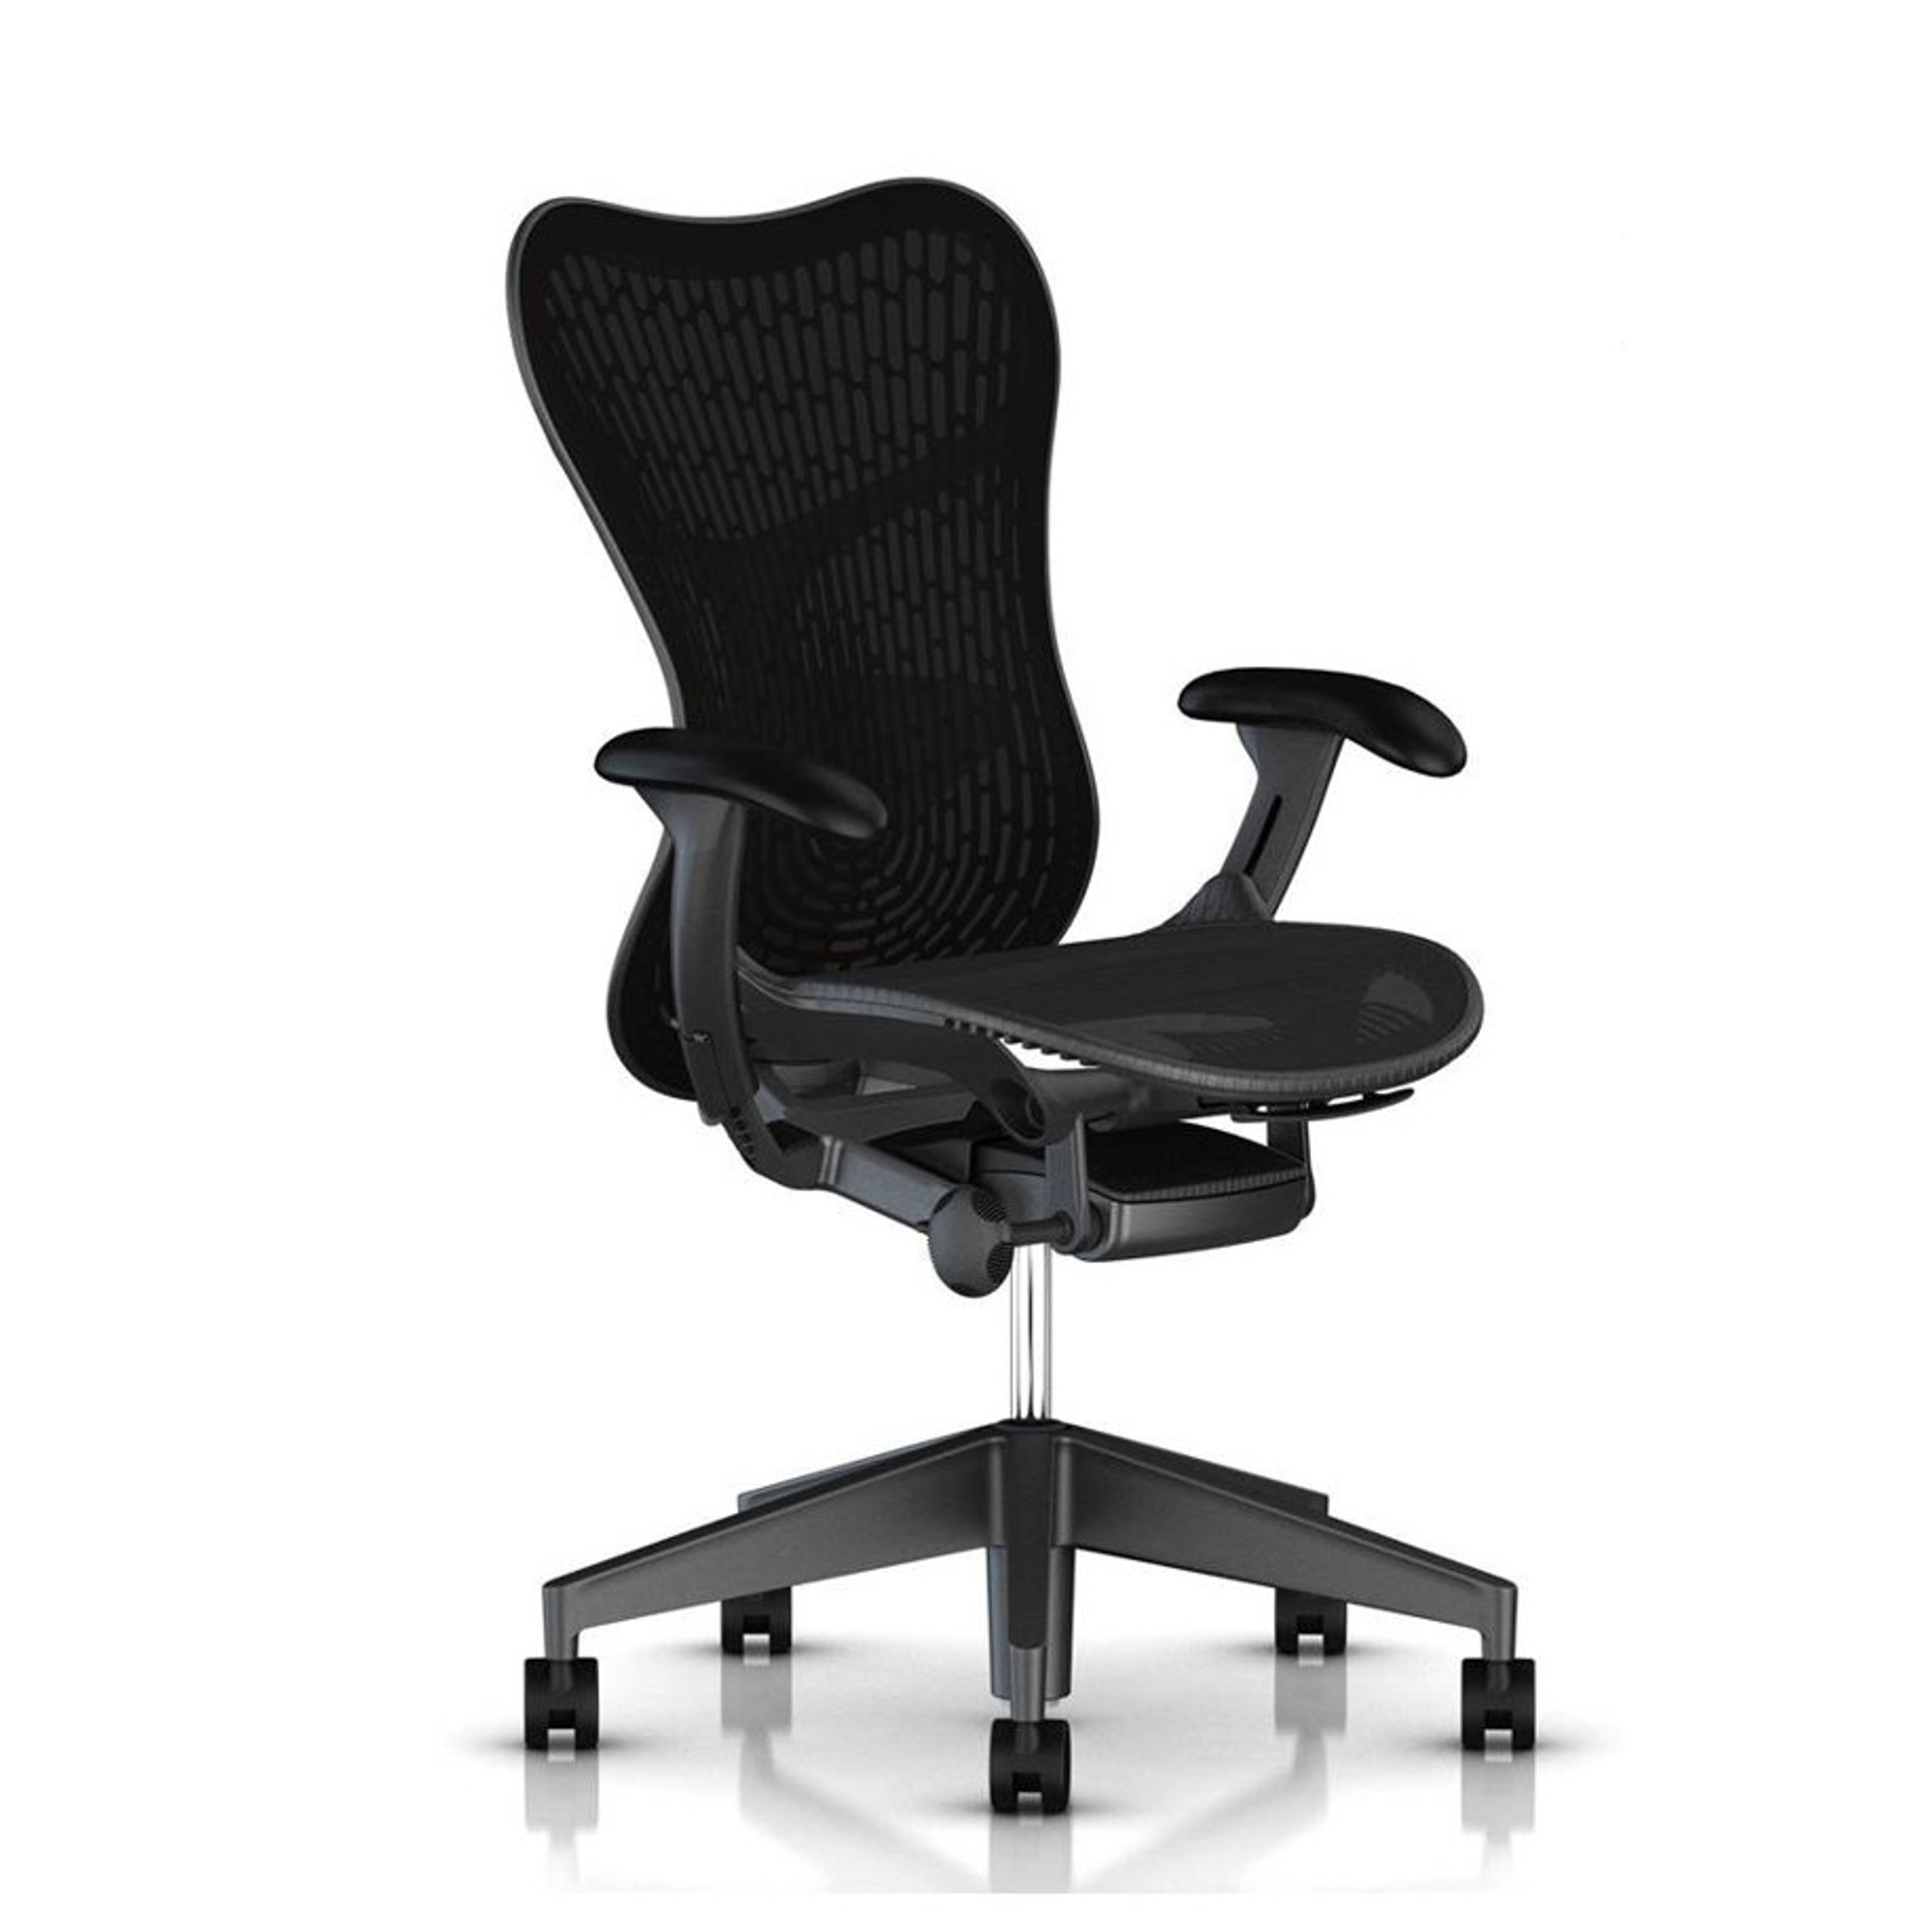 Herman Miller Executive Aeron Chair, Size B, Polished Aluminum Frame,  Black, All Features, Fully Adjustable Arms, Adjustable Posturefit Support –  Office Chair @ Work